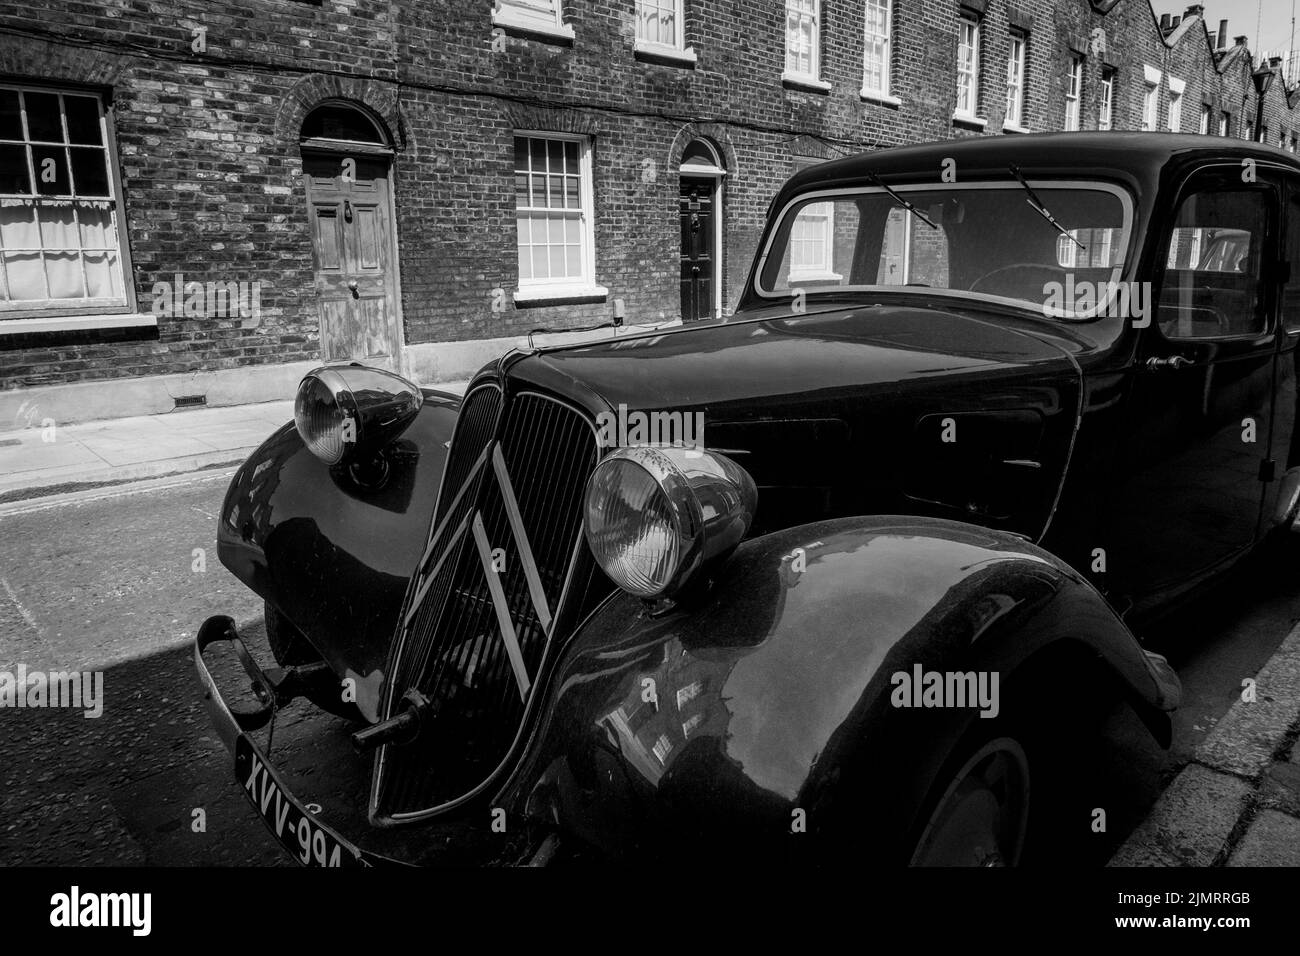 London black and white urban photography: Vintage Citroen car parked in London street. UK Stock Photo